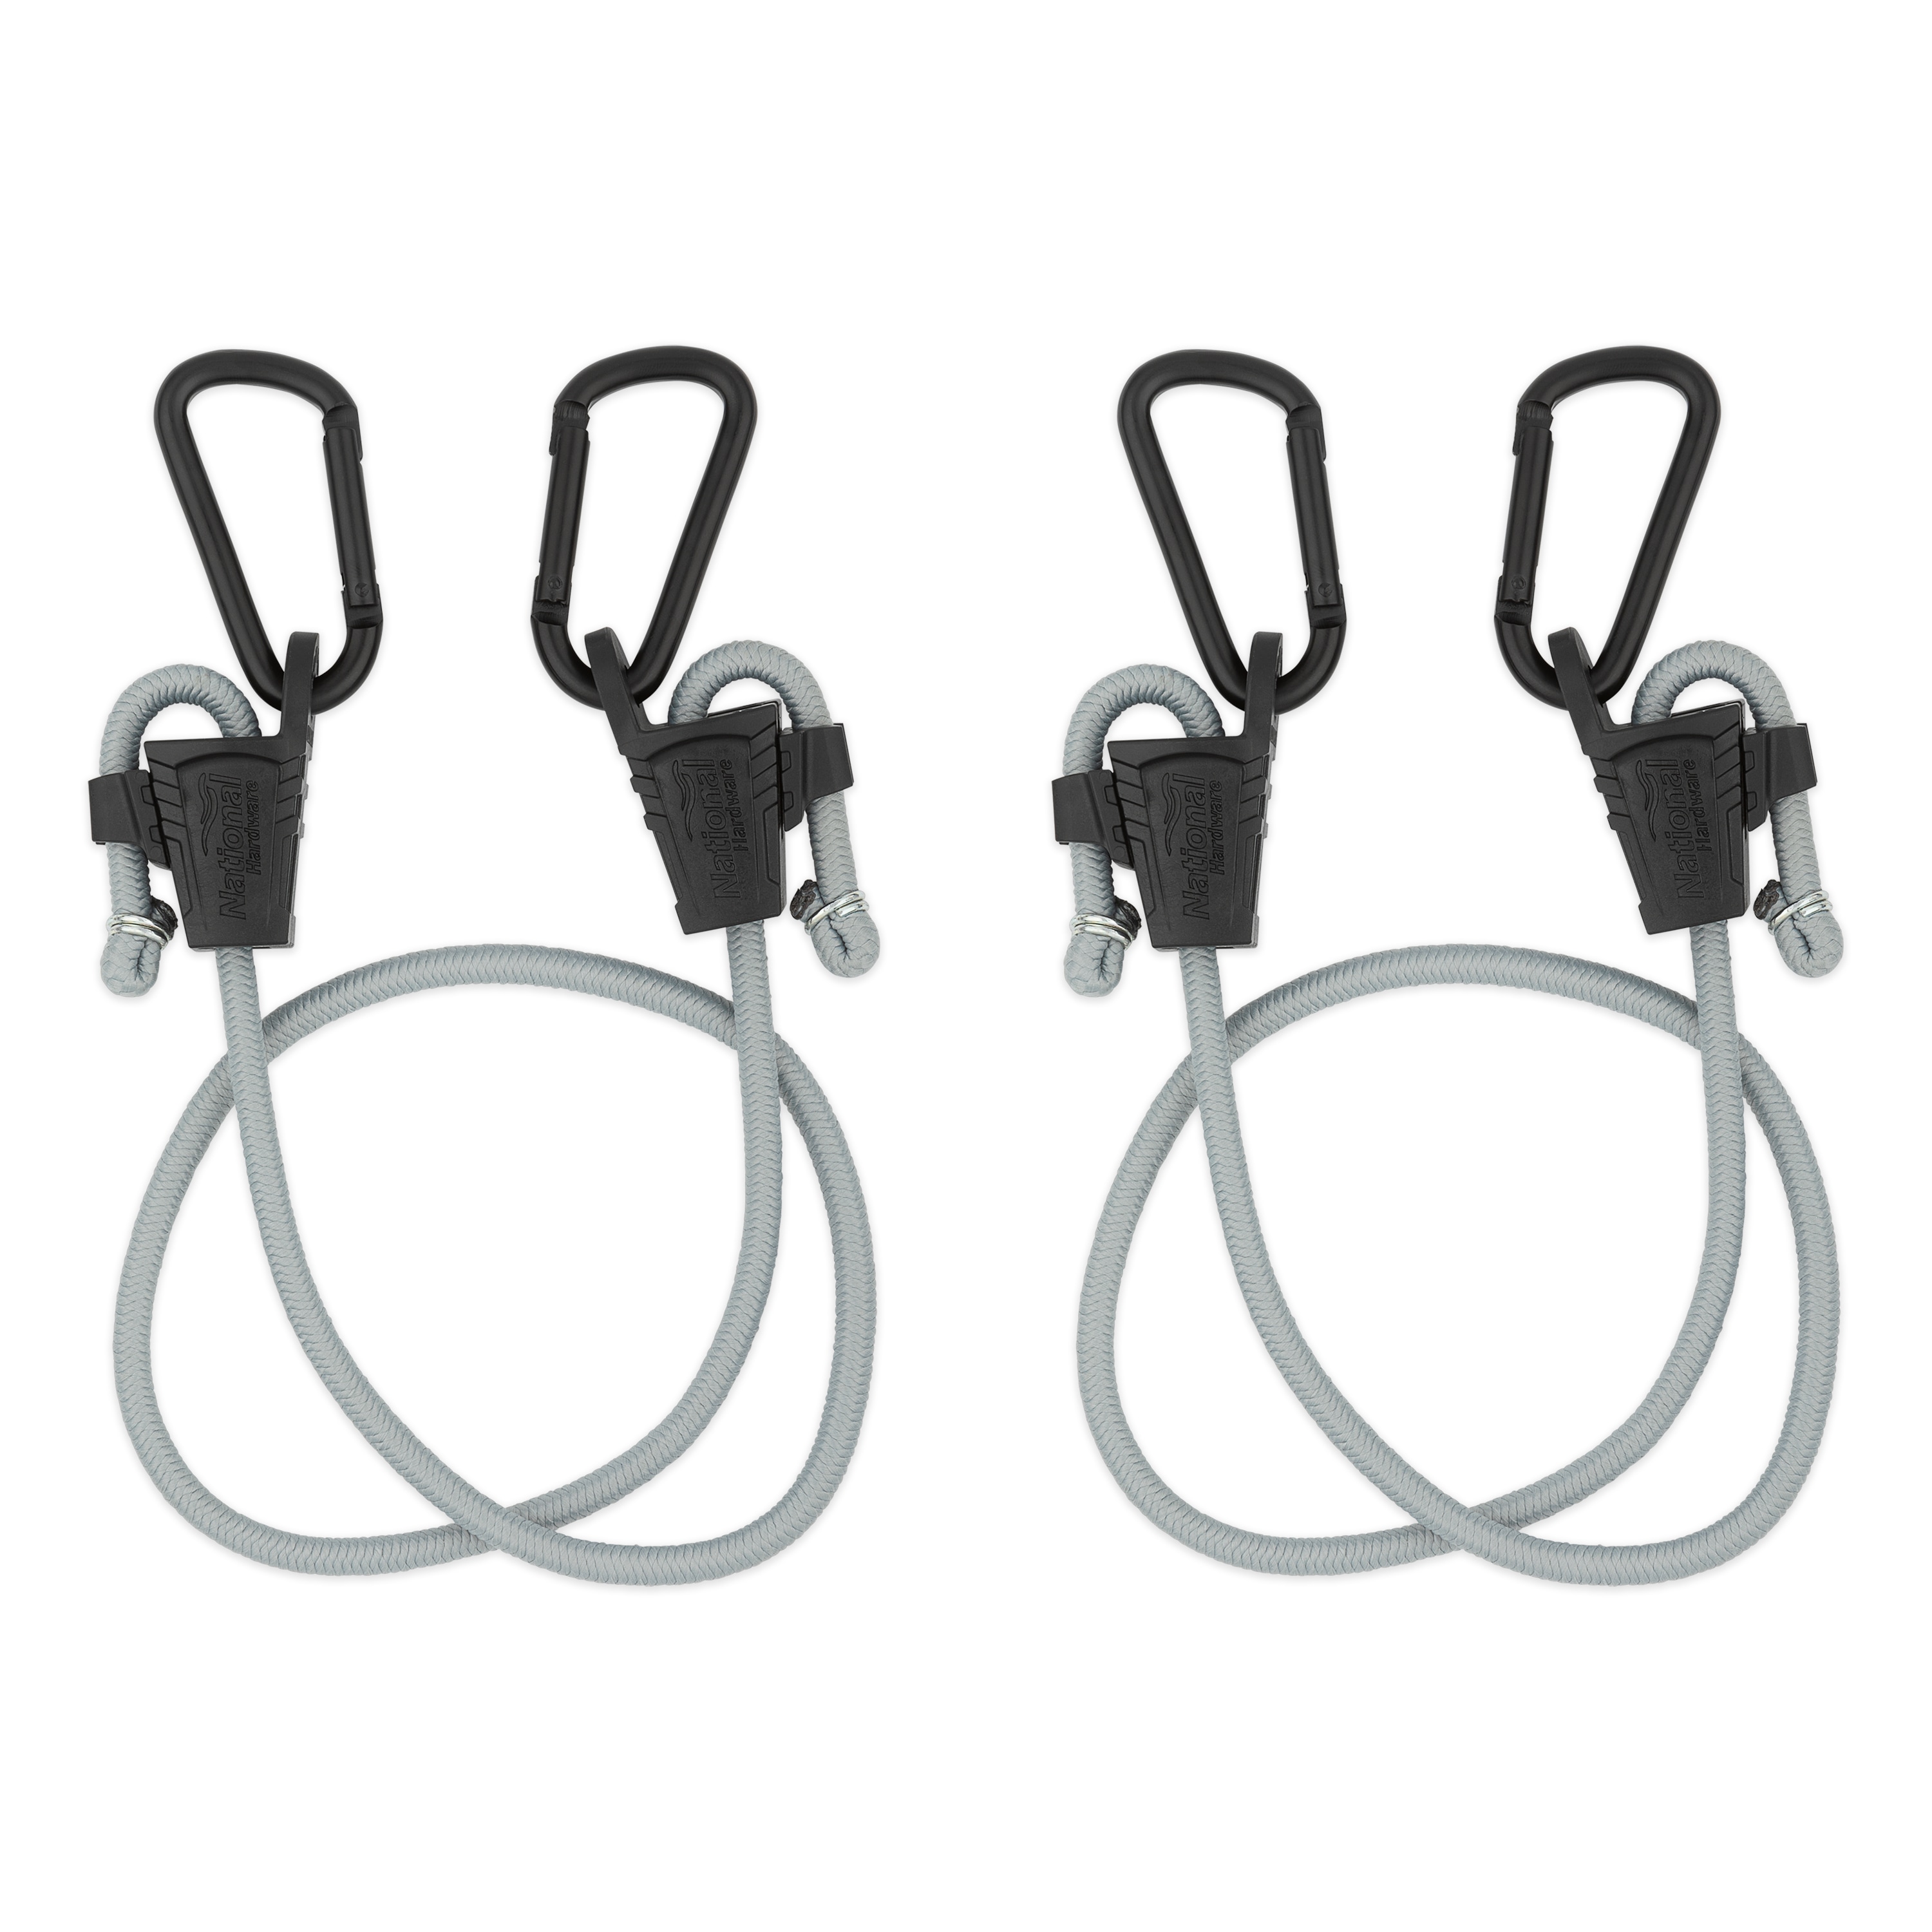 2-Pack 40" National Hardware Adjustable Bungee Cord (Black/Gray) $5.98 + Free In-Store Pickup via Lowe's/Amazon